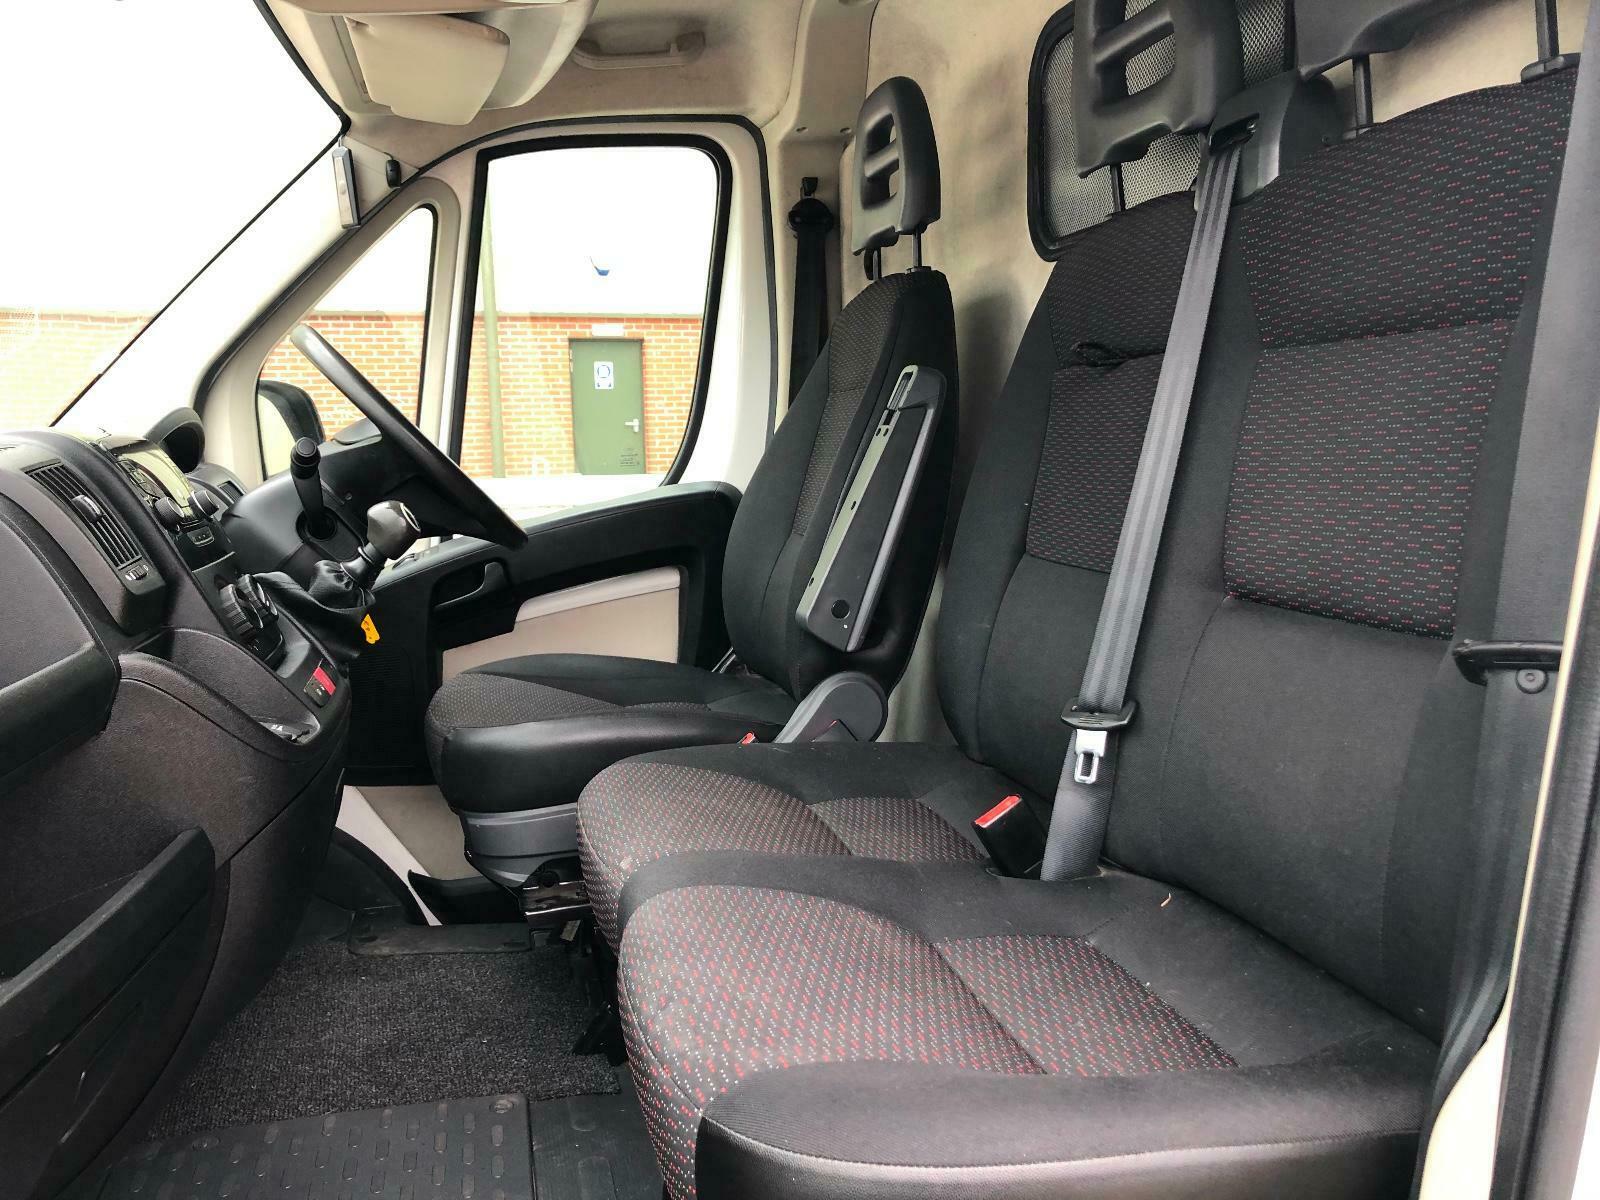 choosing the right van size for your needs